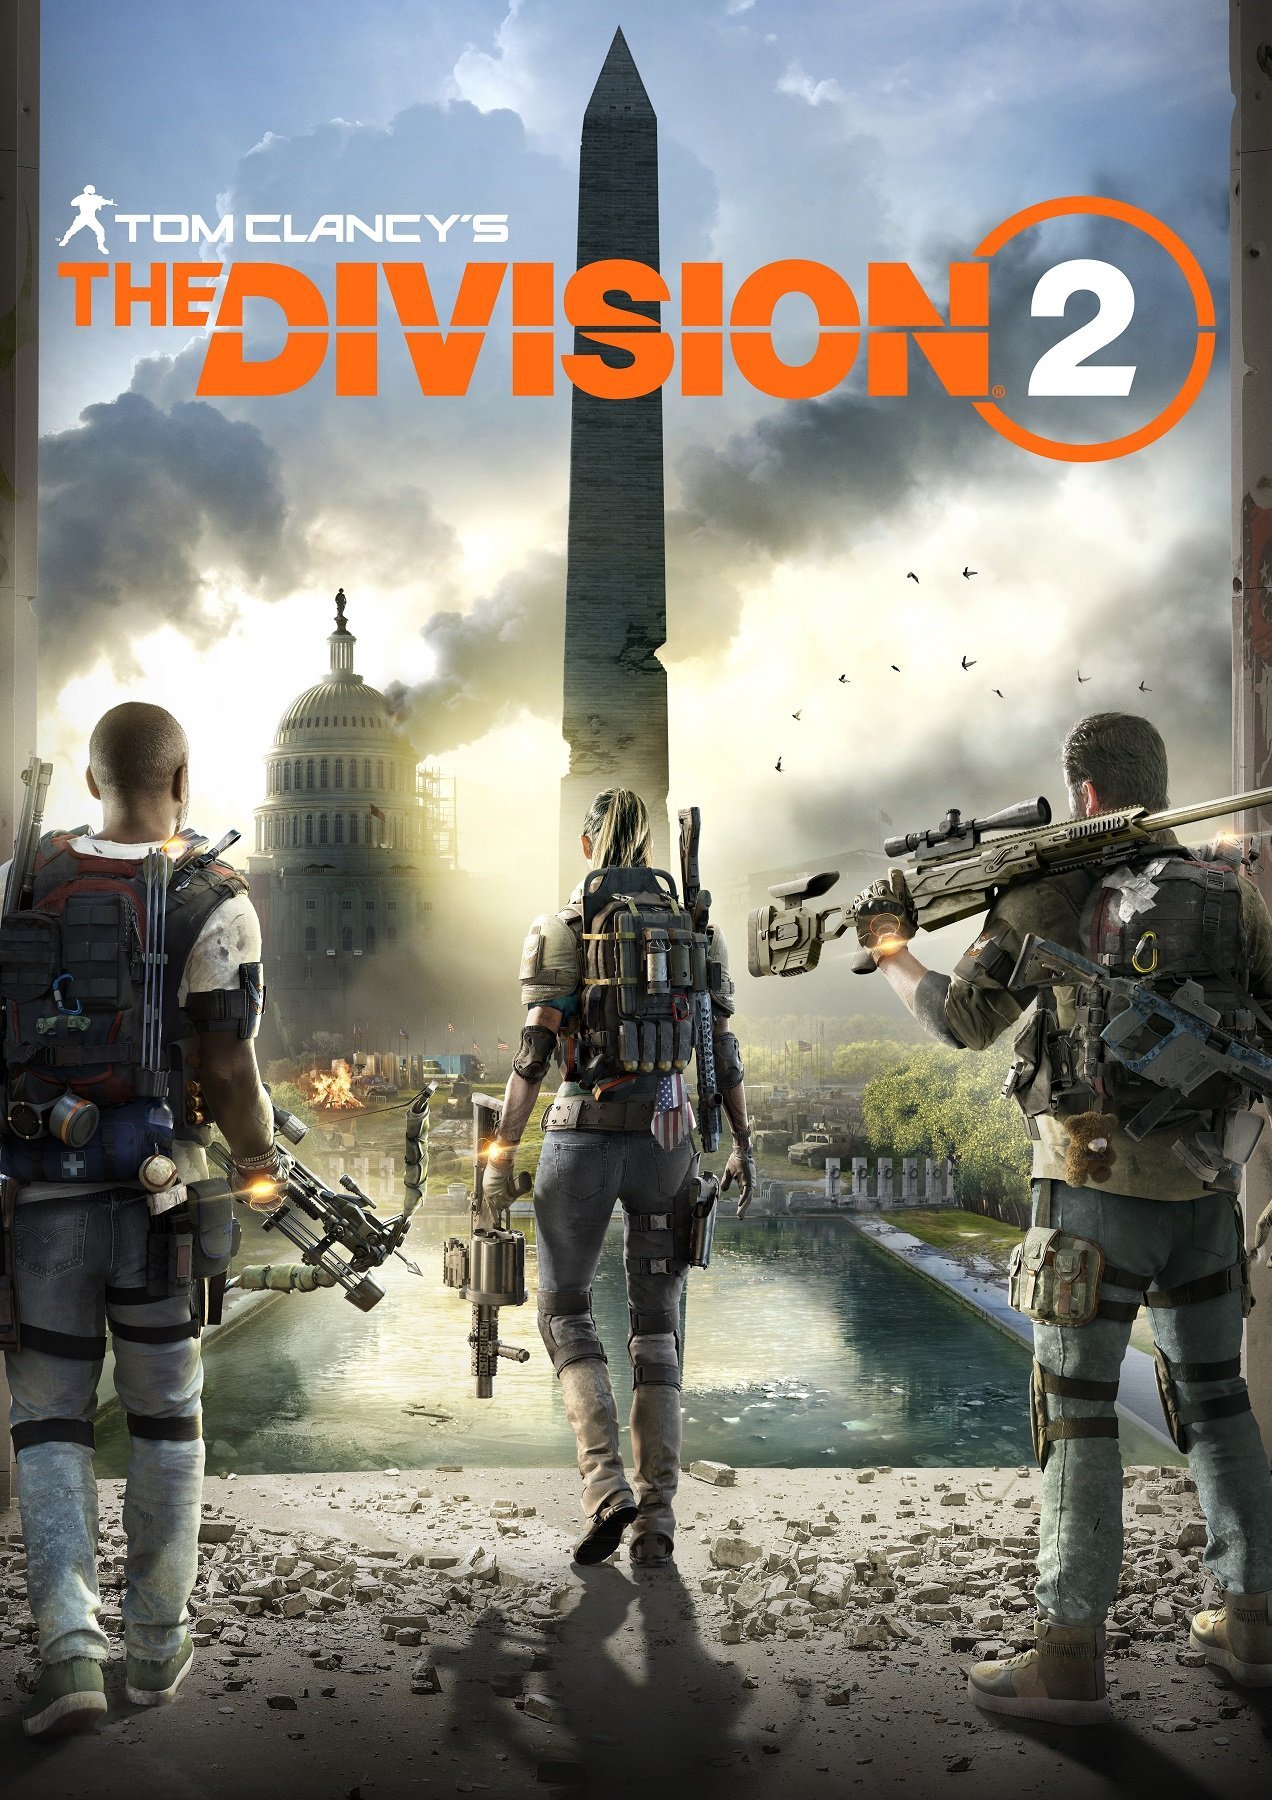 Image of Tom Clancy's The Division 2